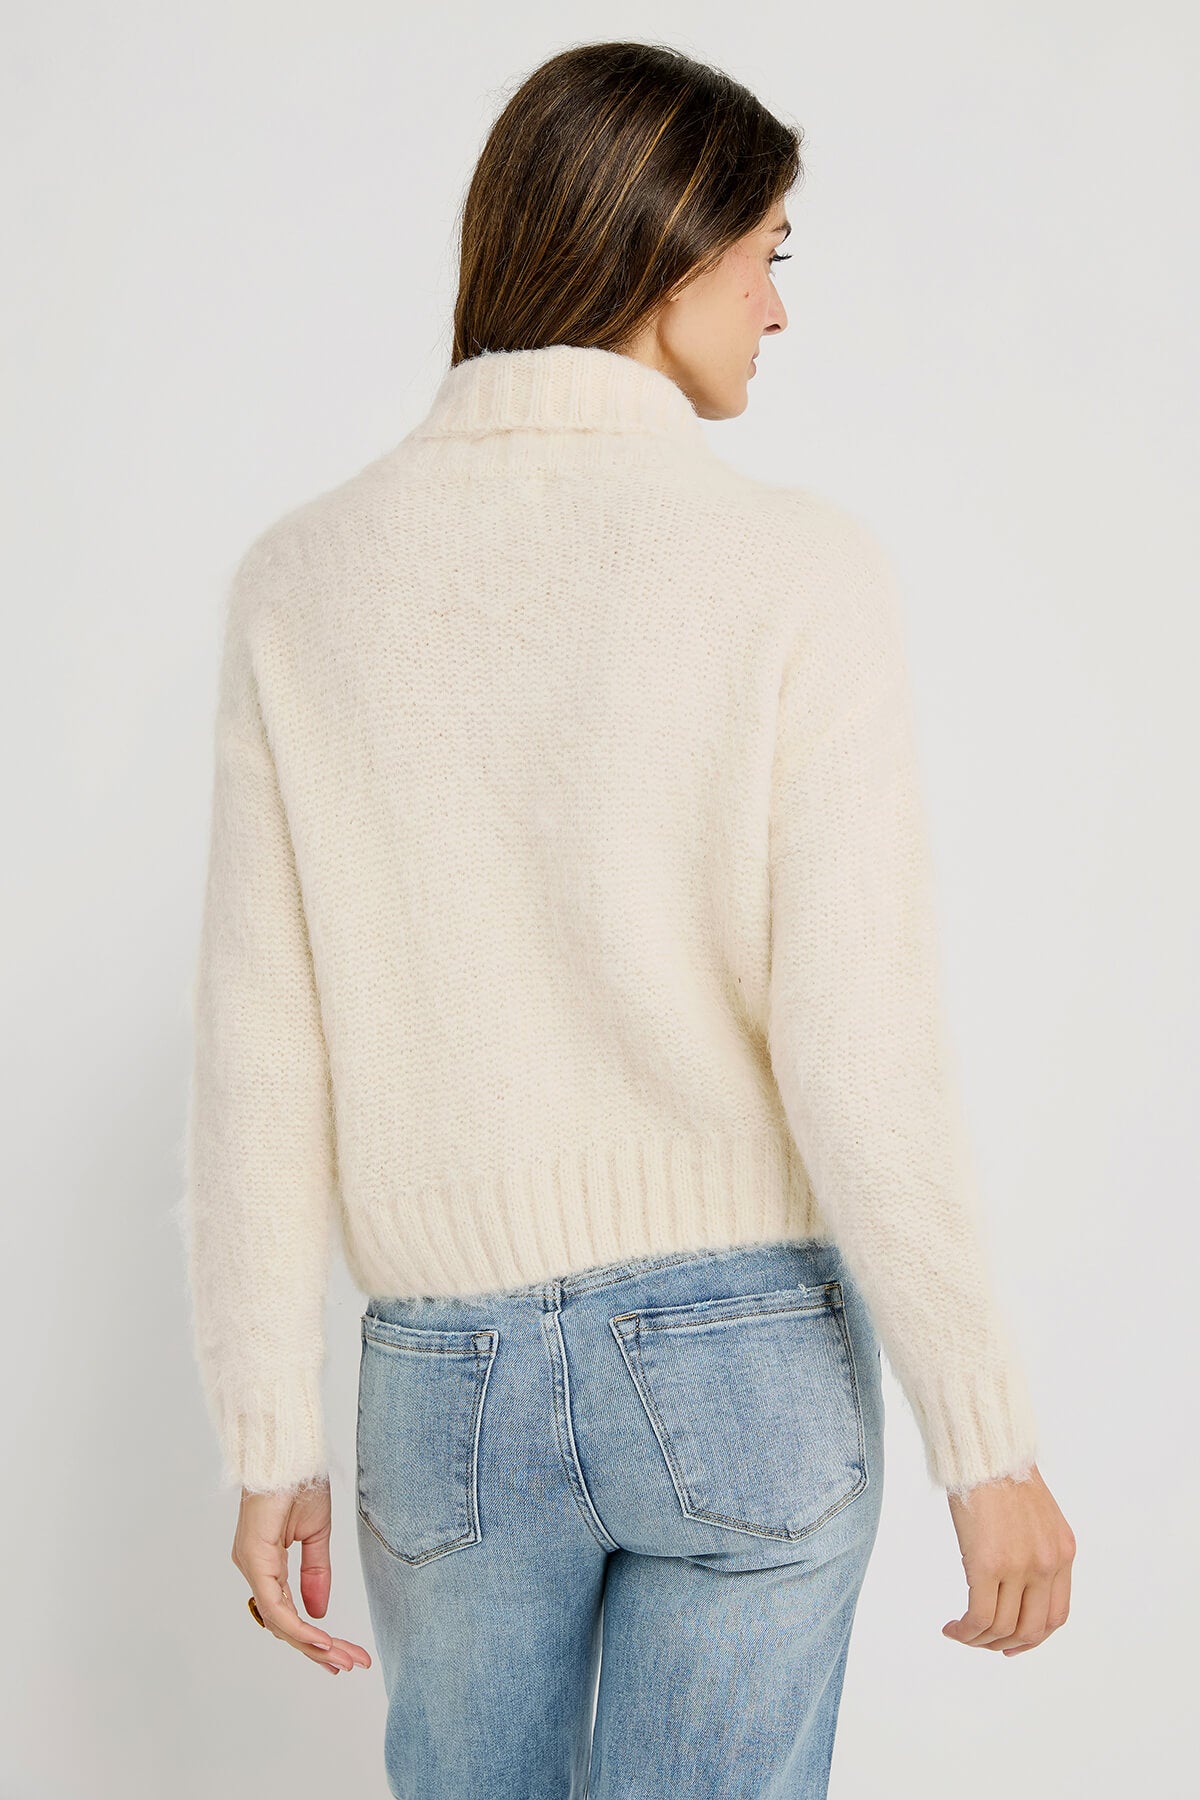 Molly Bracken Cable Turtleneck Sweater